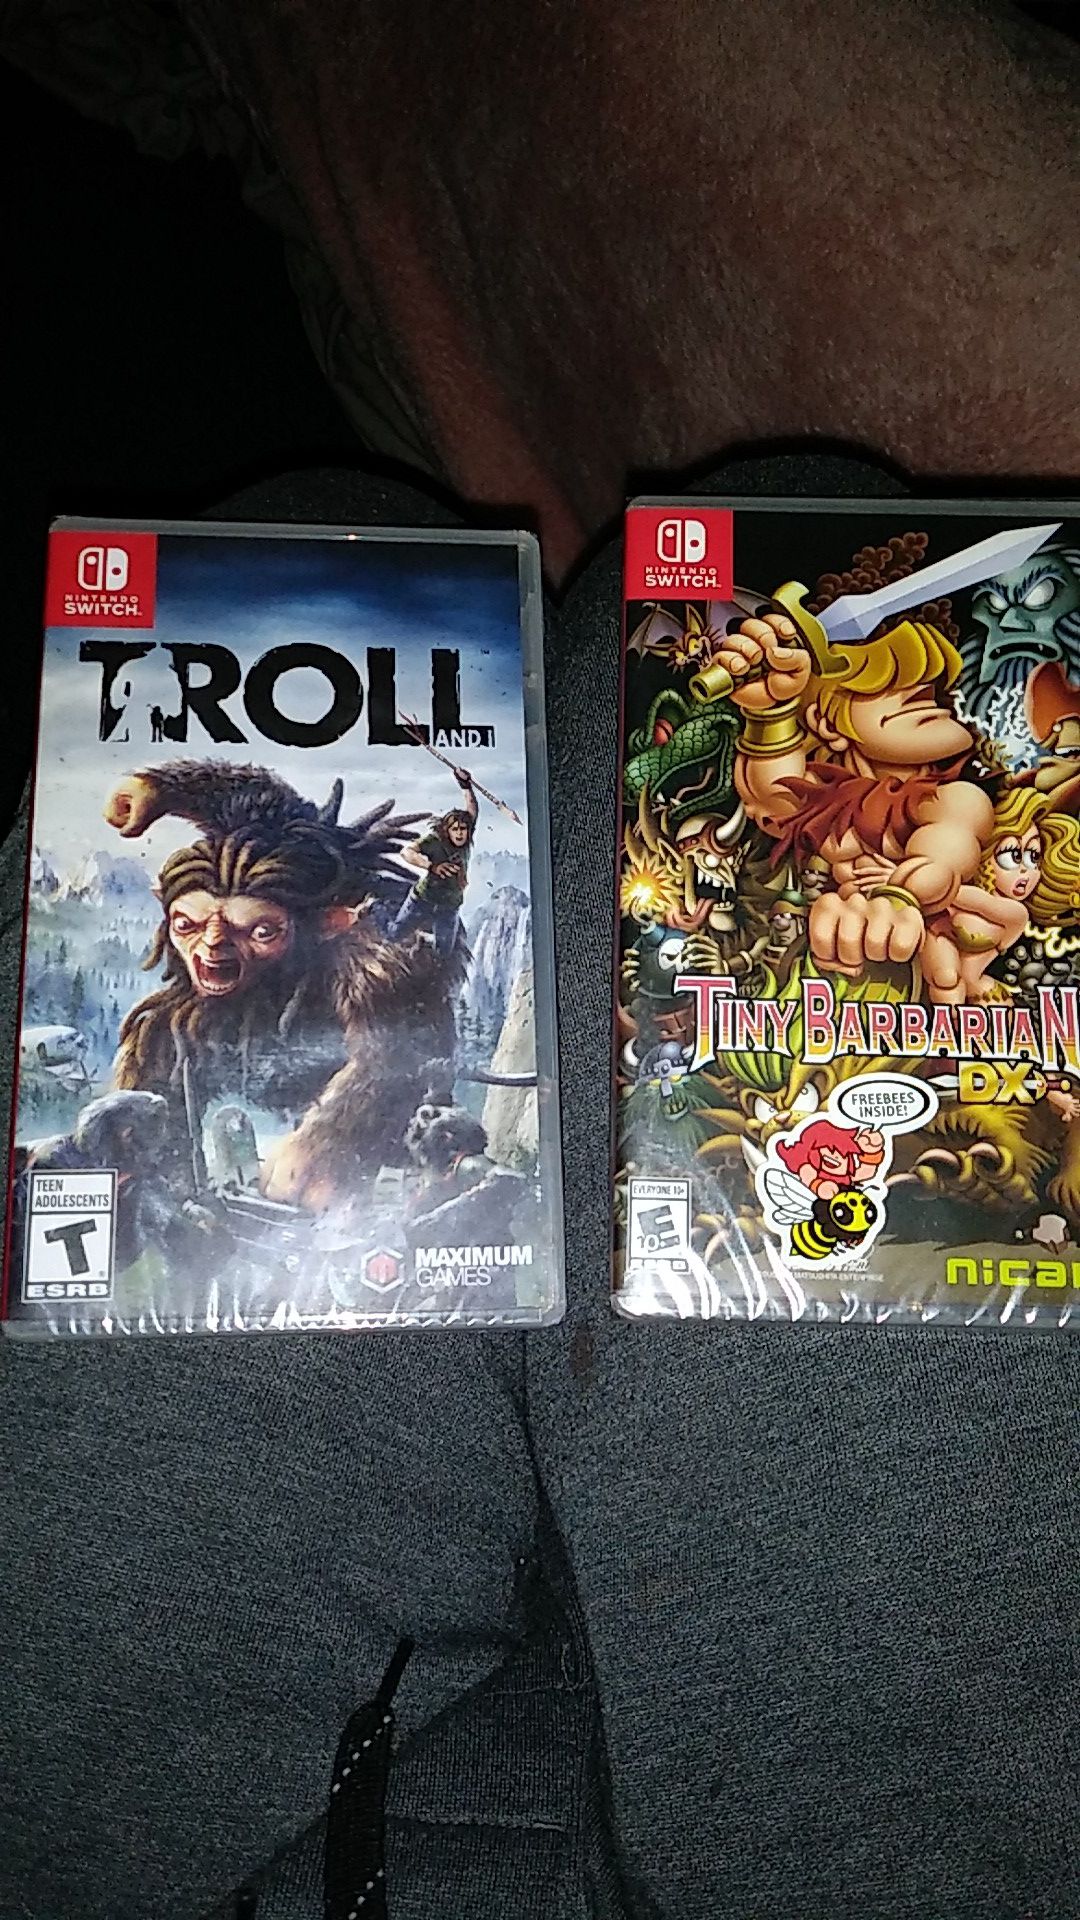 Nintendo switch games Troll and i and tiny barbarian dz